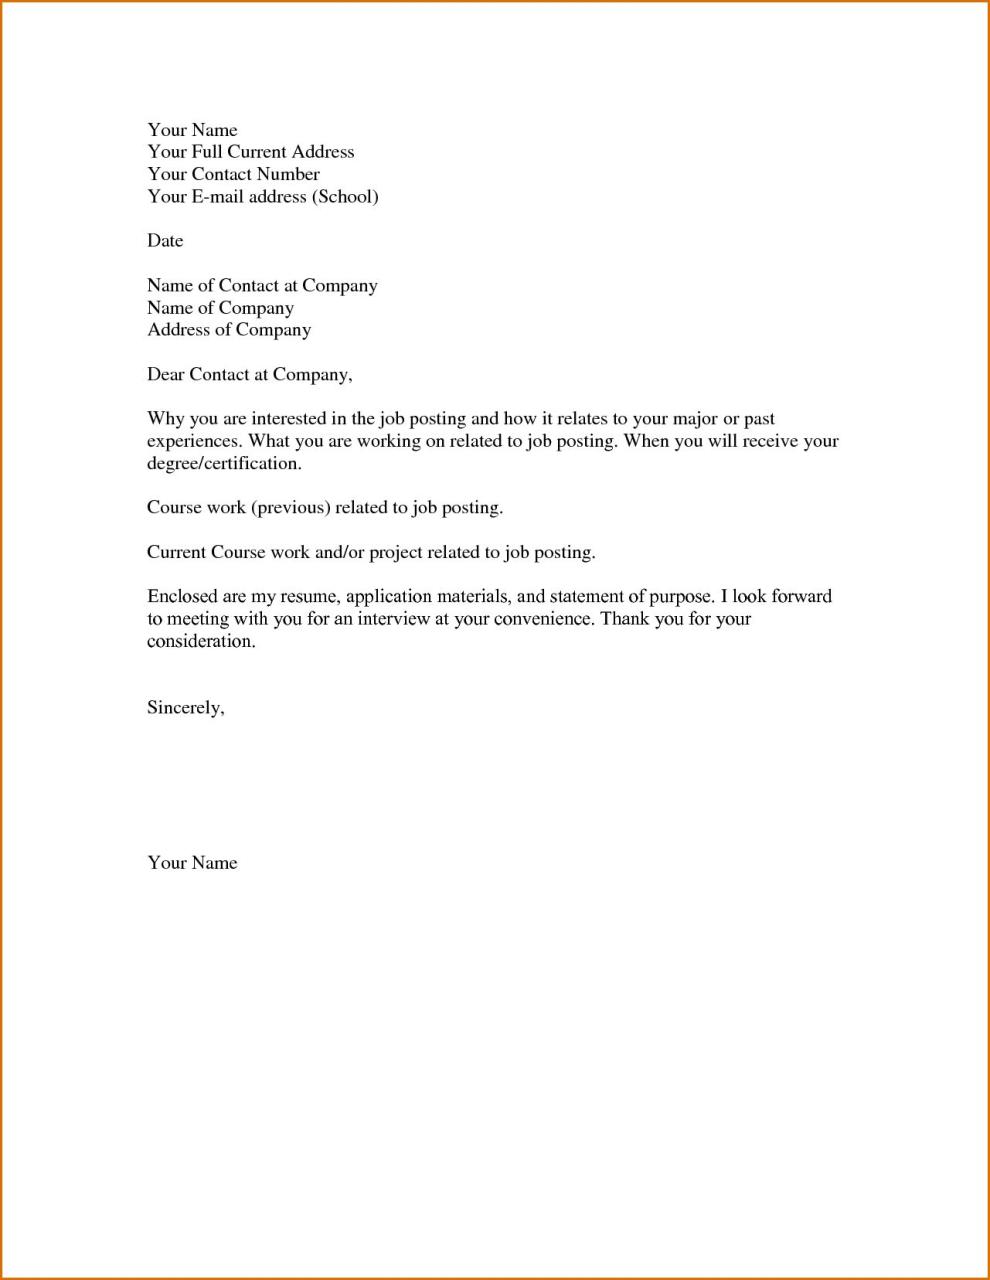 Quotation Submission Cover Letter Sample